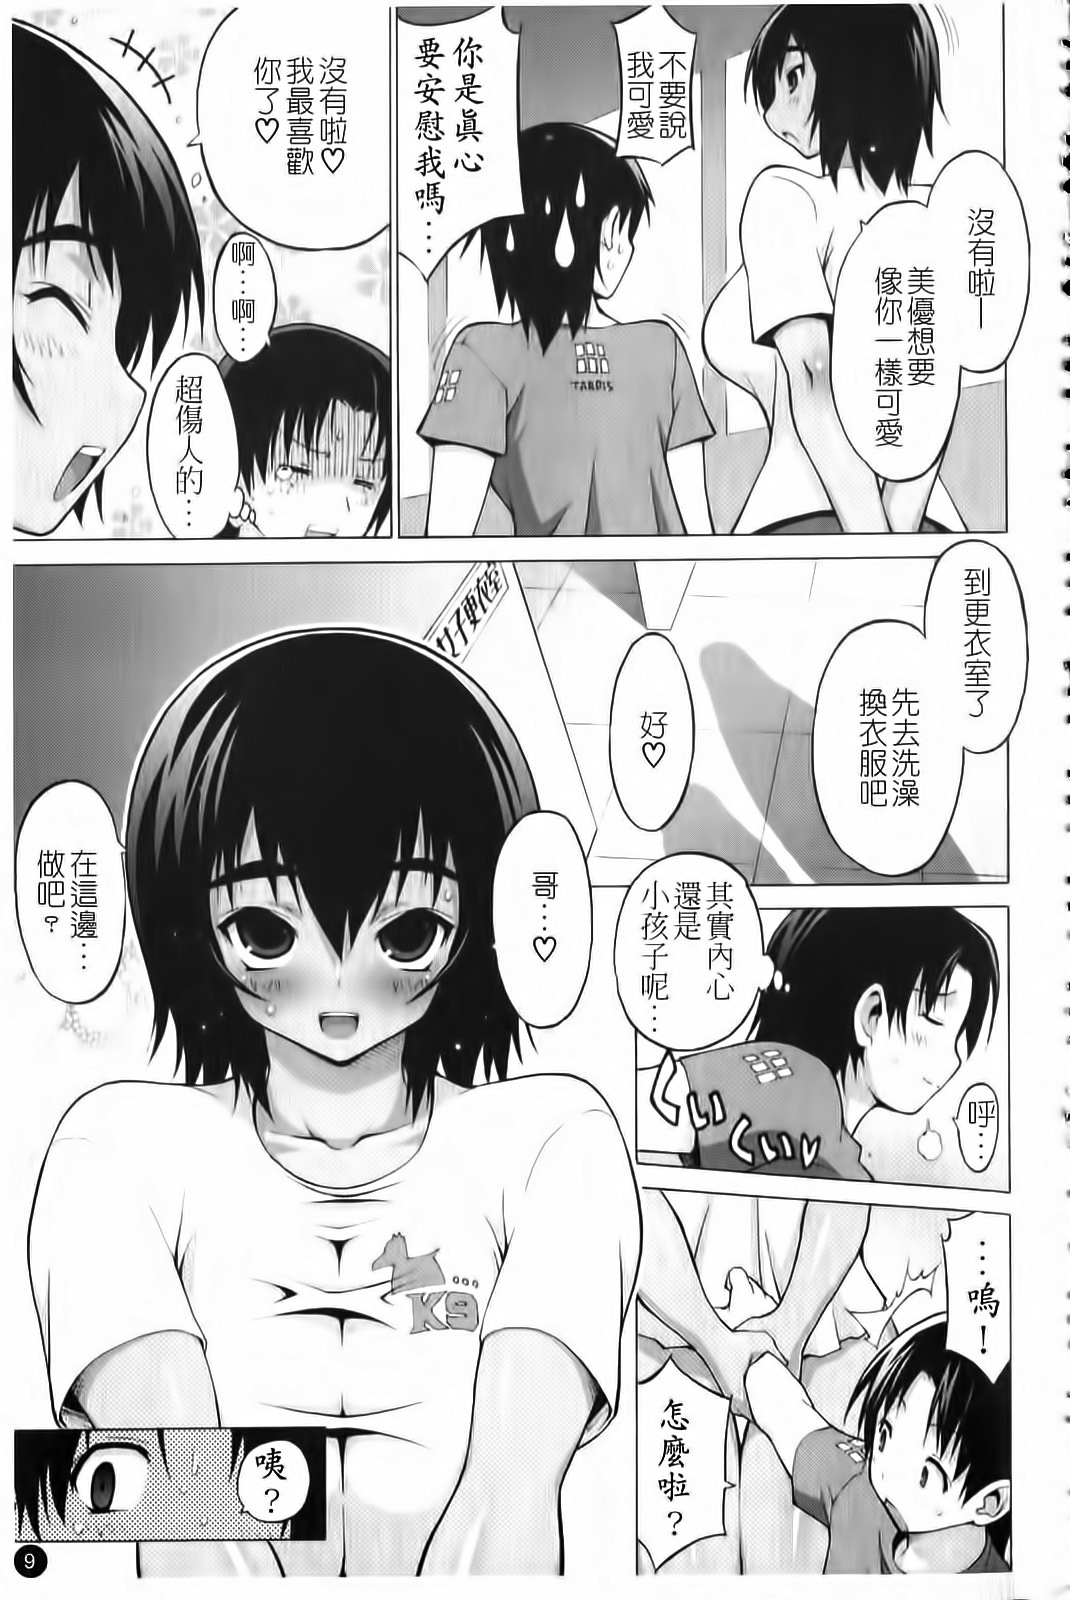 [Onomeshin] Oppai Party [Chinese] page 10 full